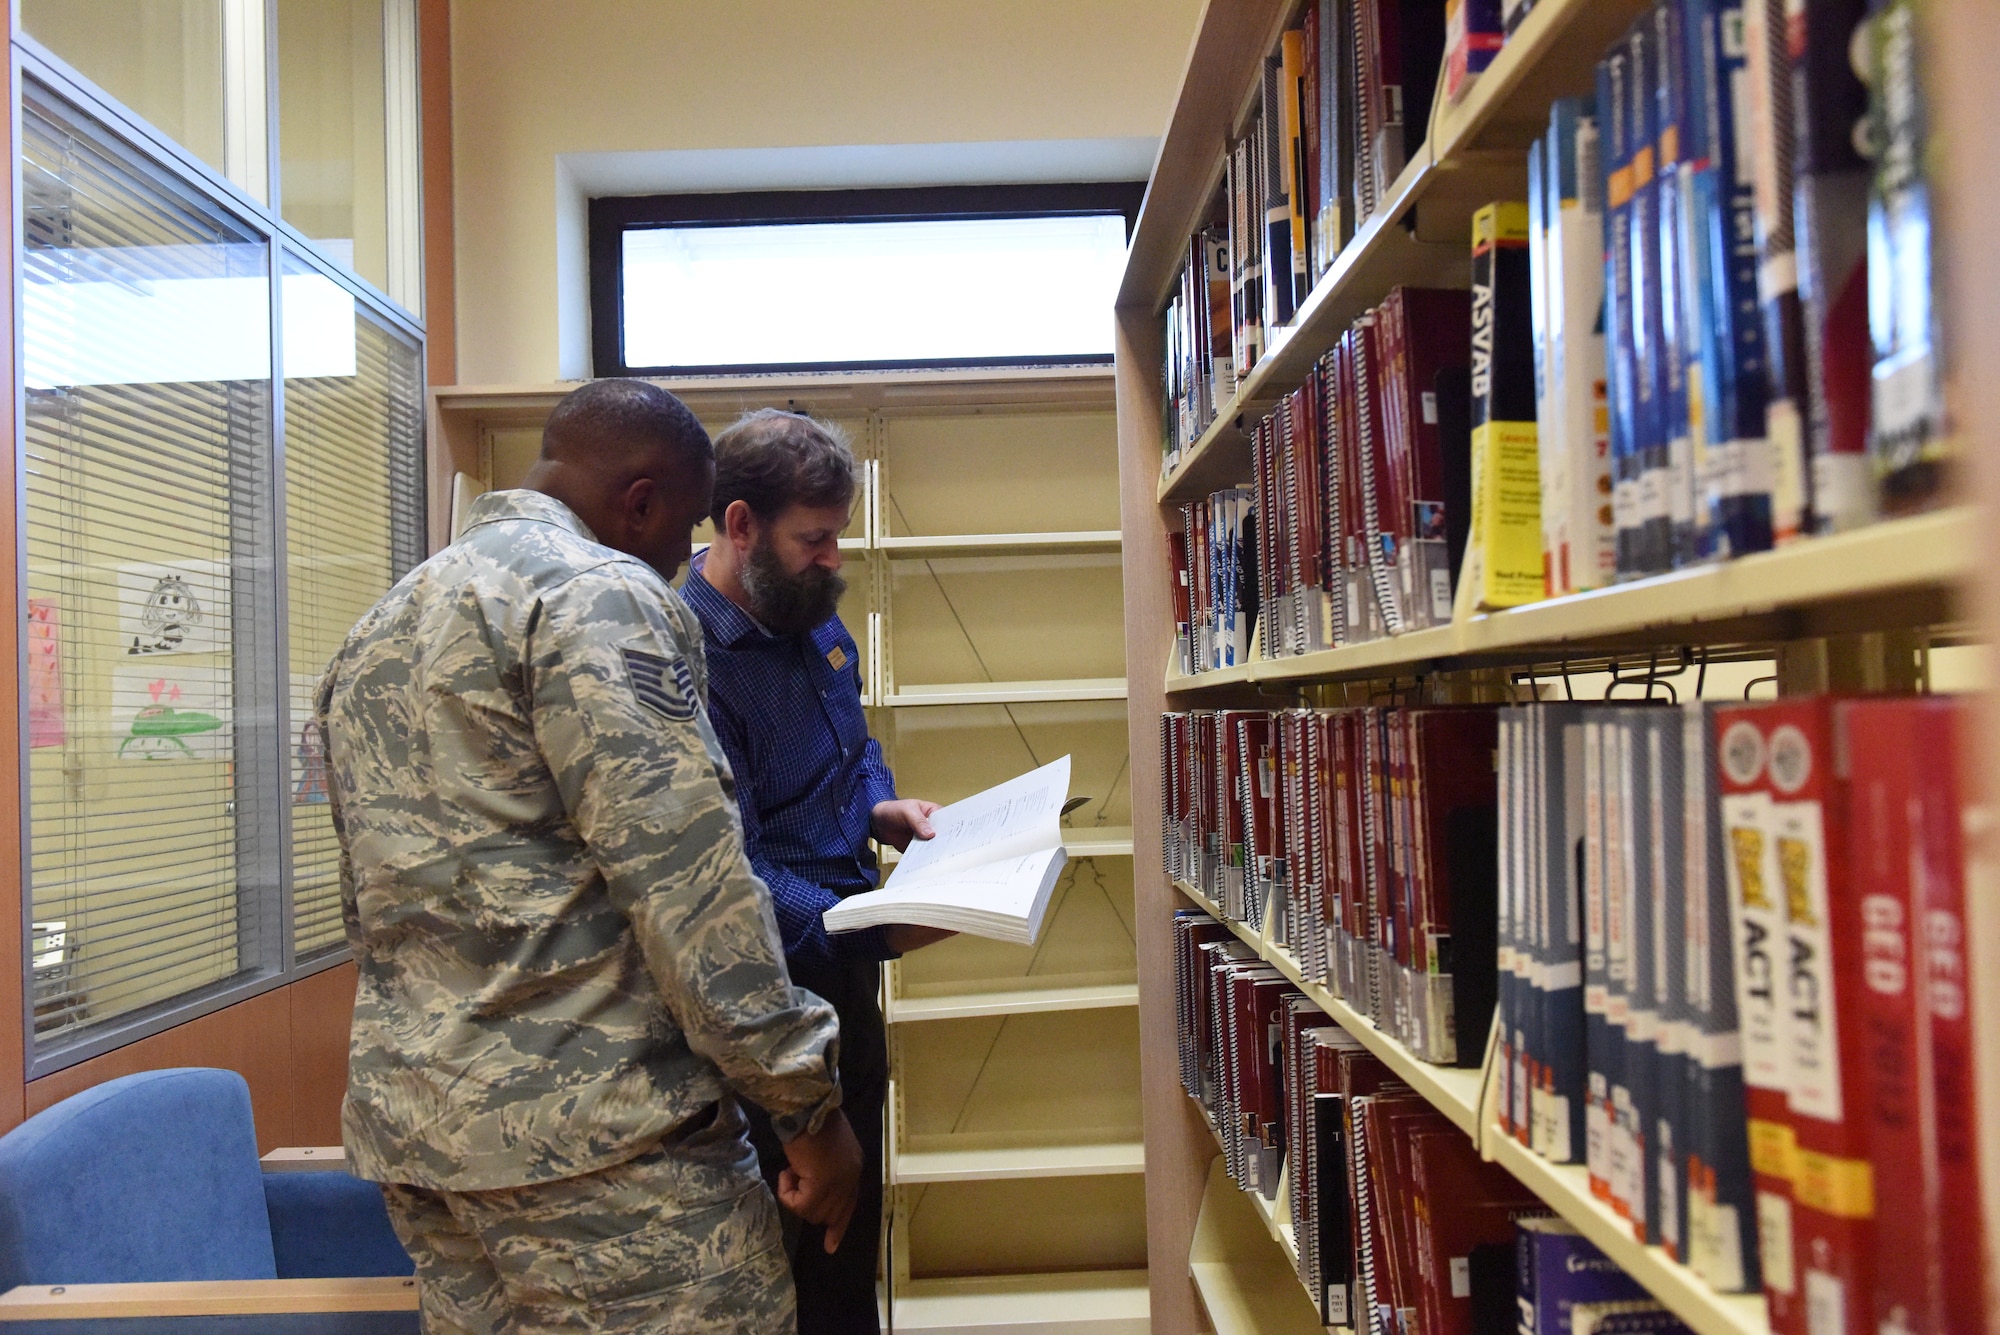 A librarian helps a service member find a book.